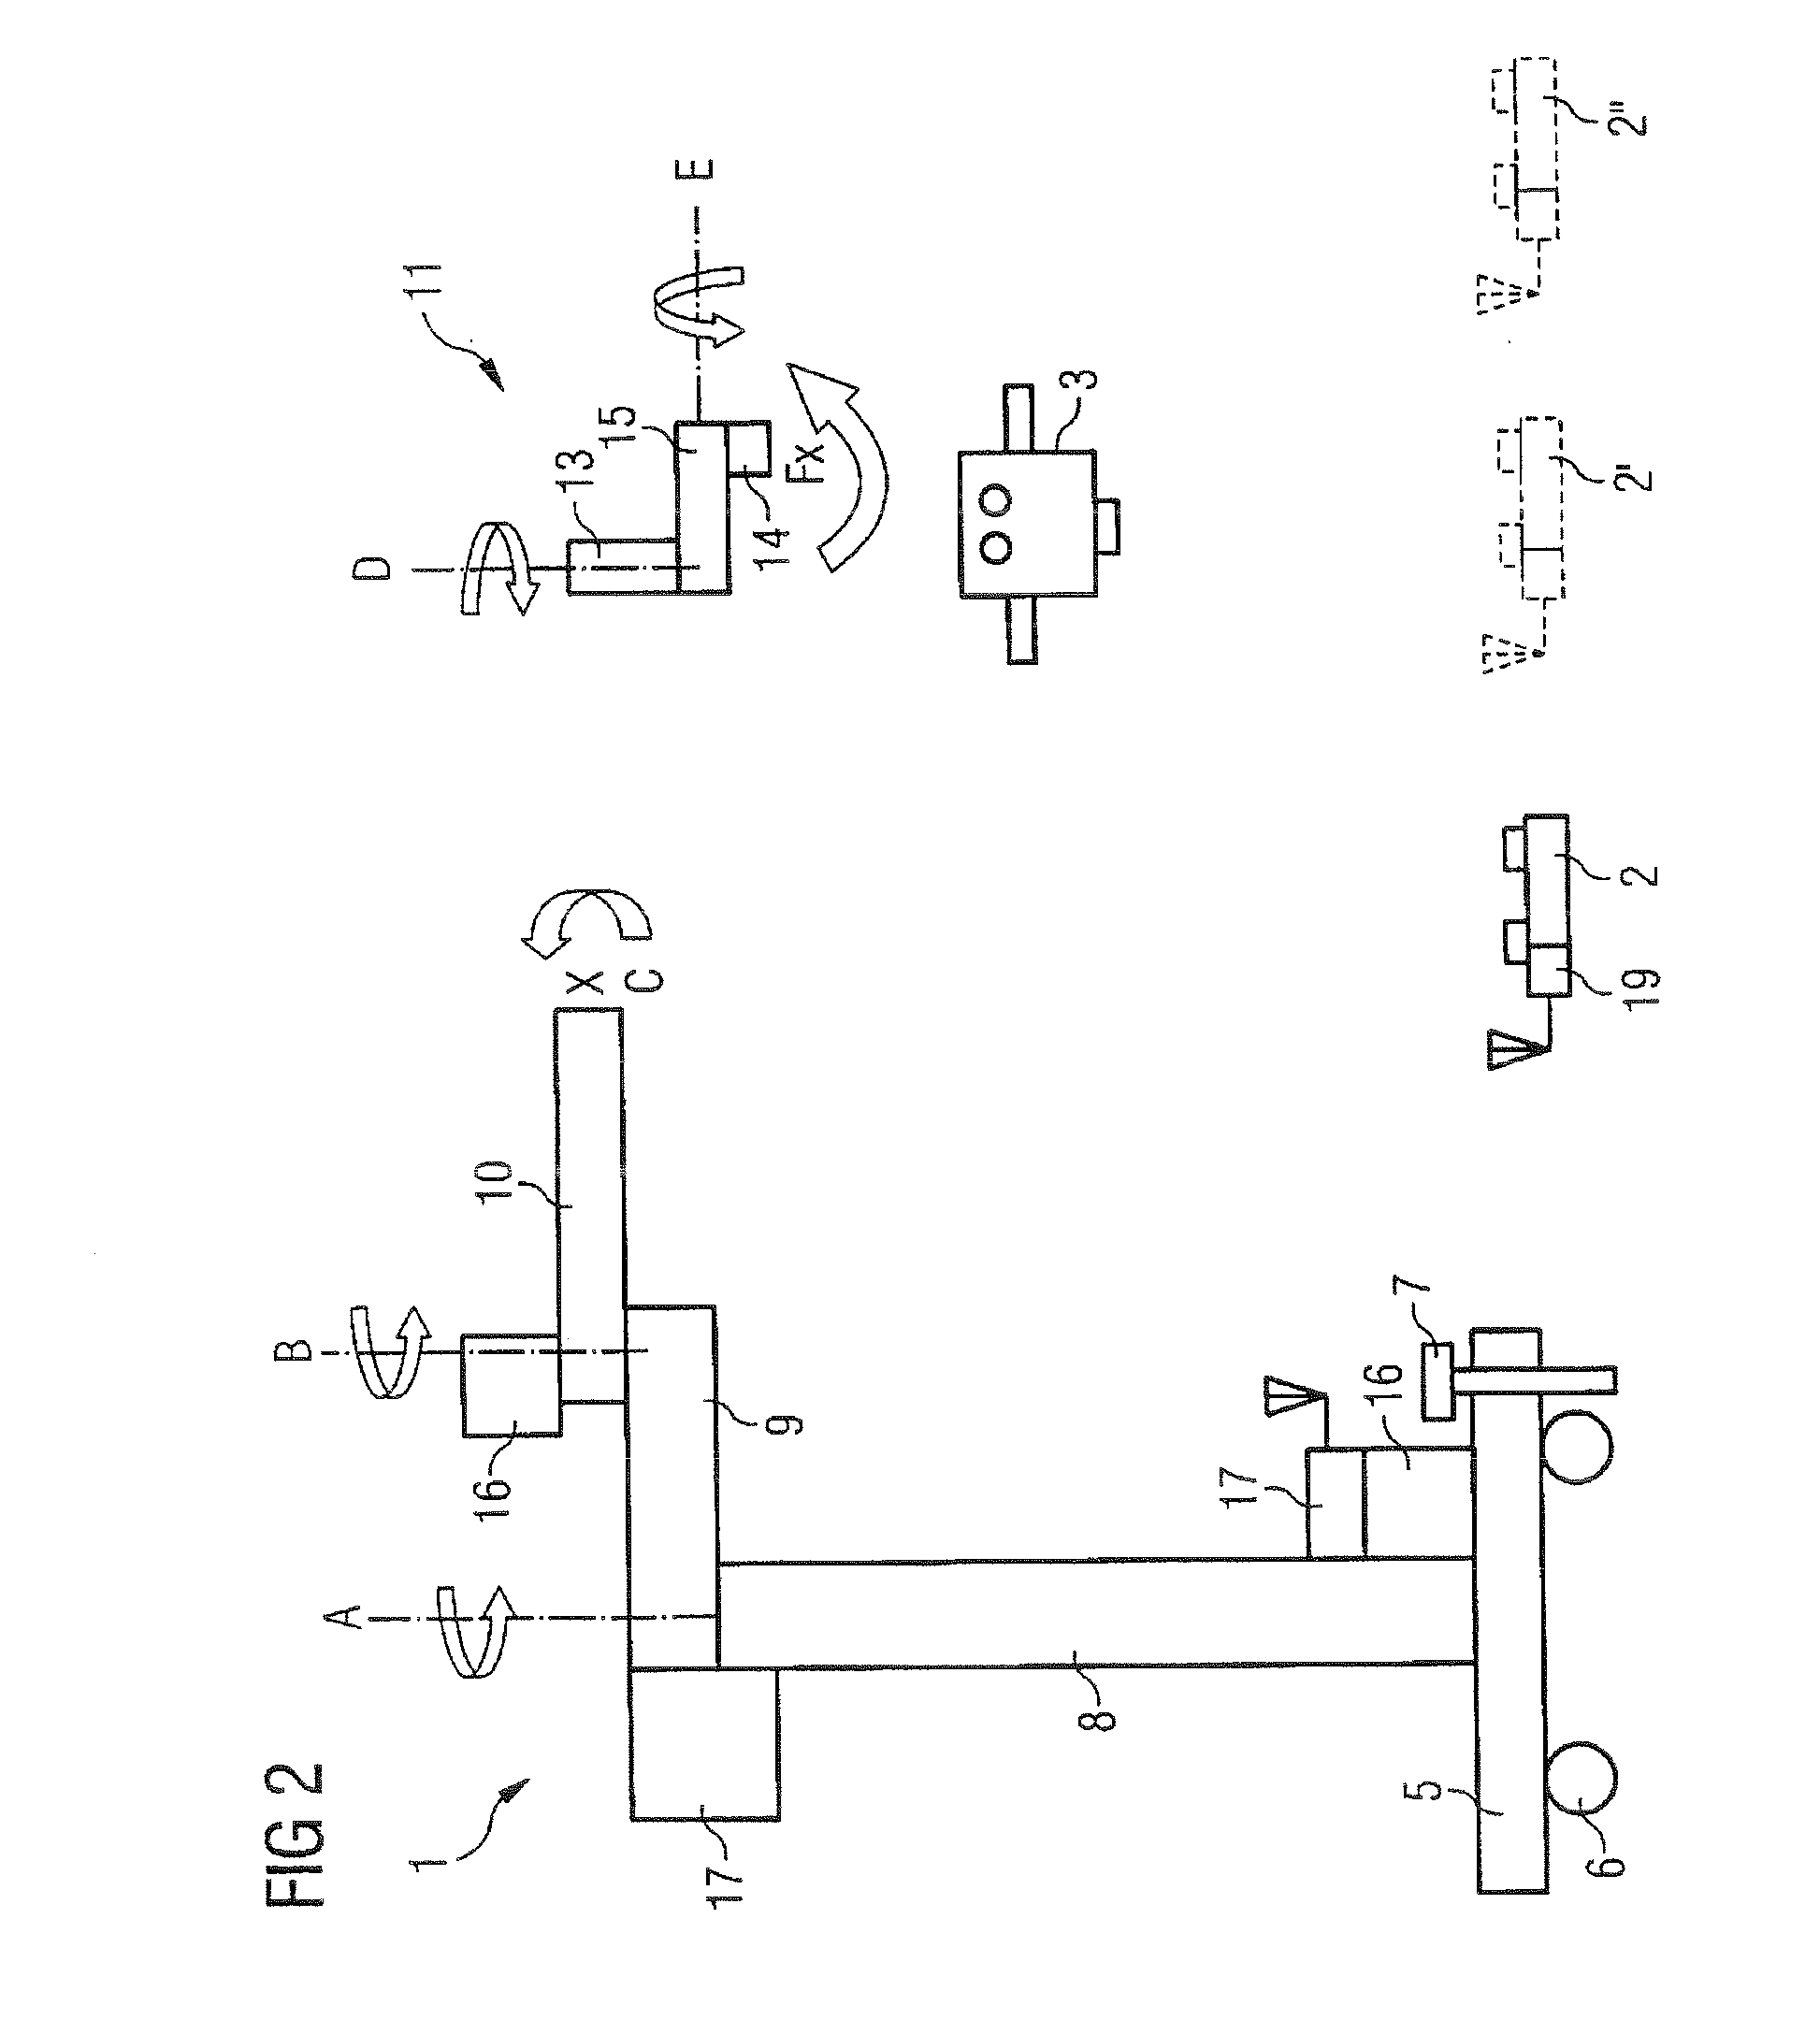 Method for connecting wireless electric actuating devices to a medical appliance